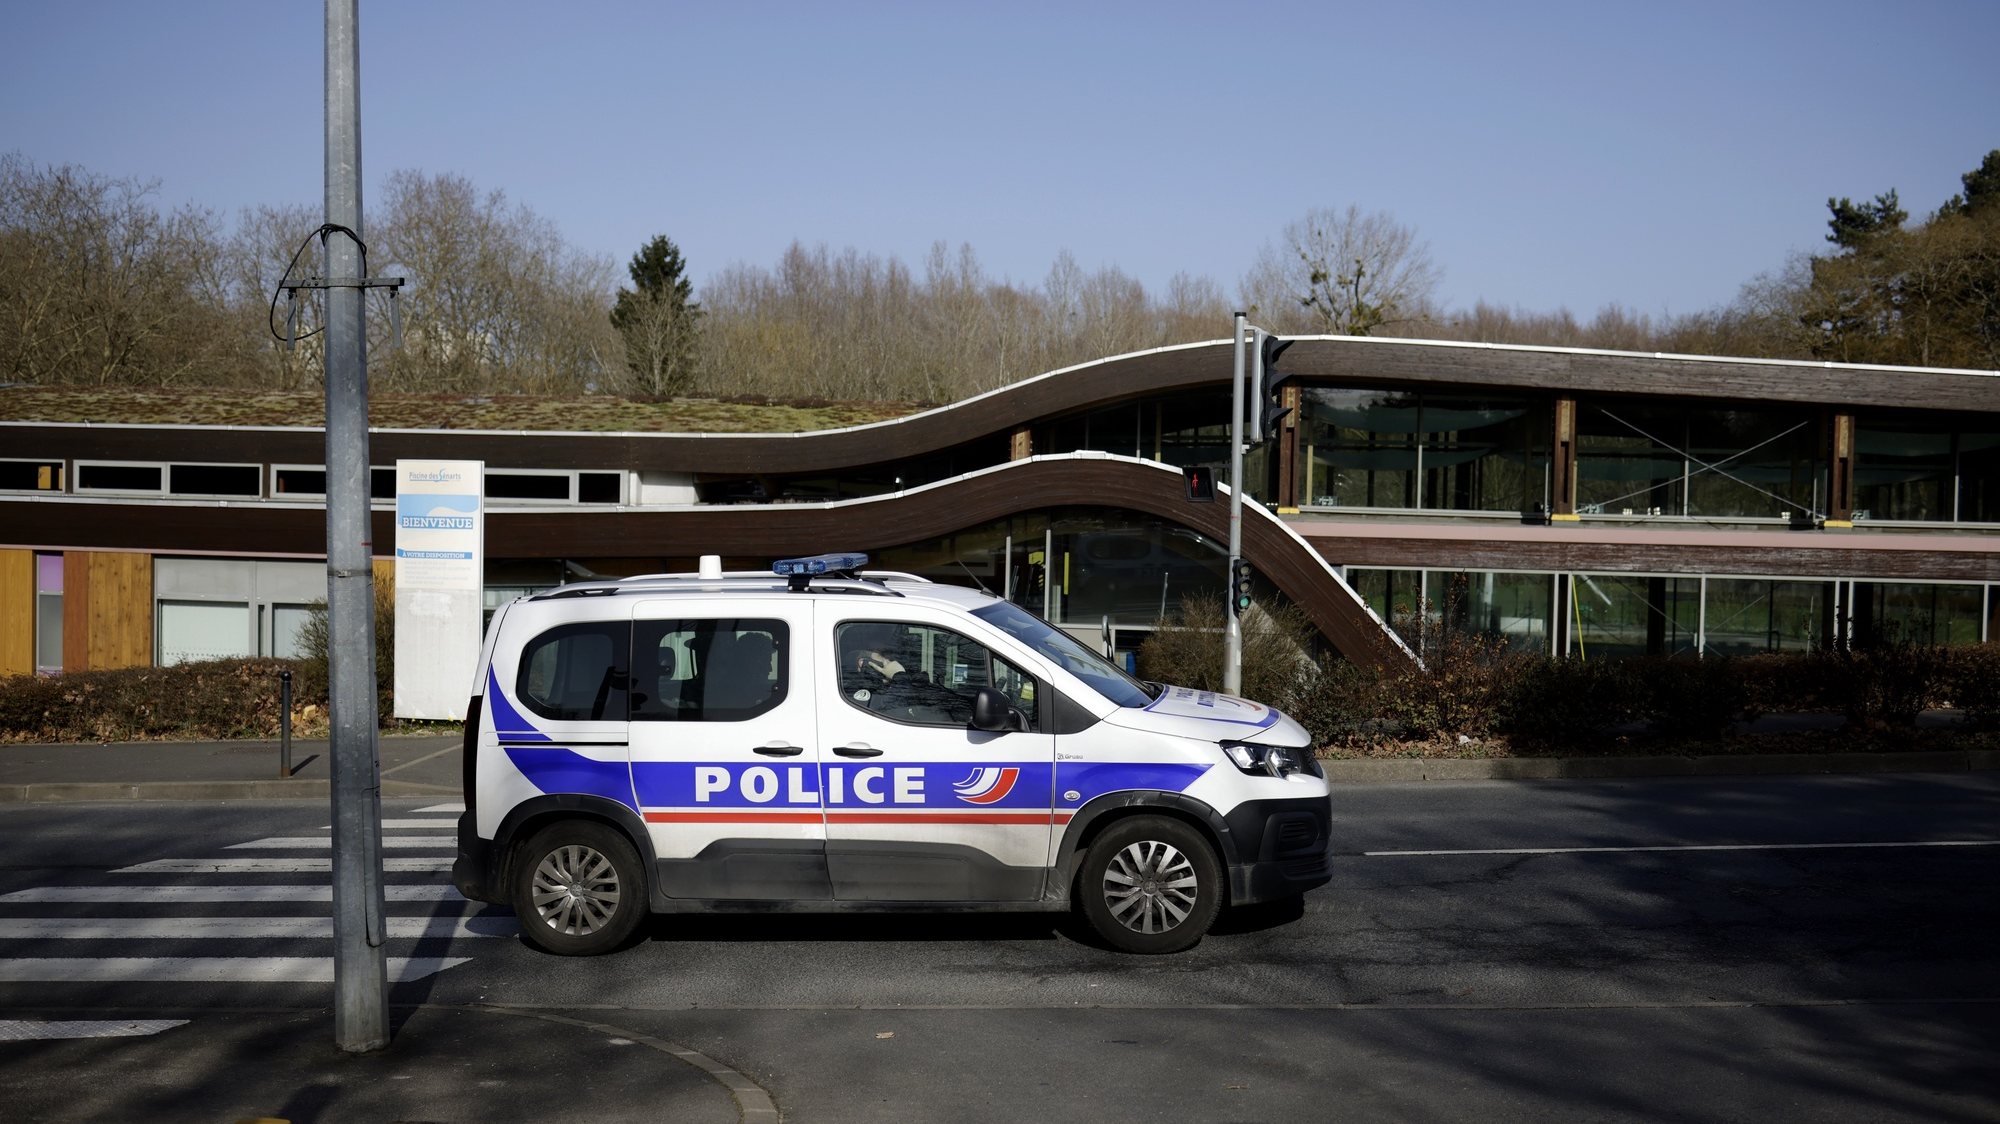 epa09033387 A police car drives by the public swimming pool in the aftermath of the death of a 14-year-old teenager in a brawl between rival gangs on 23 February 2021, in Boussy-Saint-Antoine, south of Paris, France, 24 February 2021. A young schoolgirl also died following clashes between rival gangs on 22 February in Saint-Cheron. French Interior Minister Darmanin announced that 60 gendarmes in Saint-Cheron and 30 police officers in Boussy-Saint-Antoine will be deployed as reinforcement.  EPA/YOAN VALAT